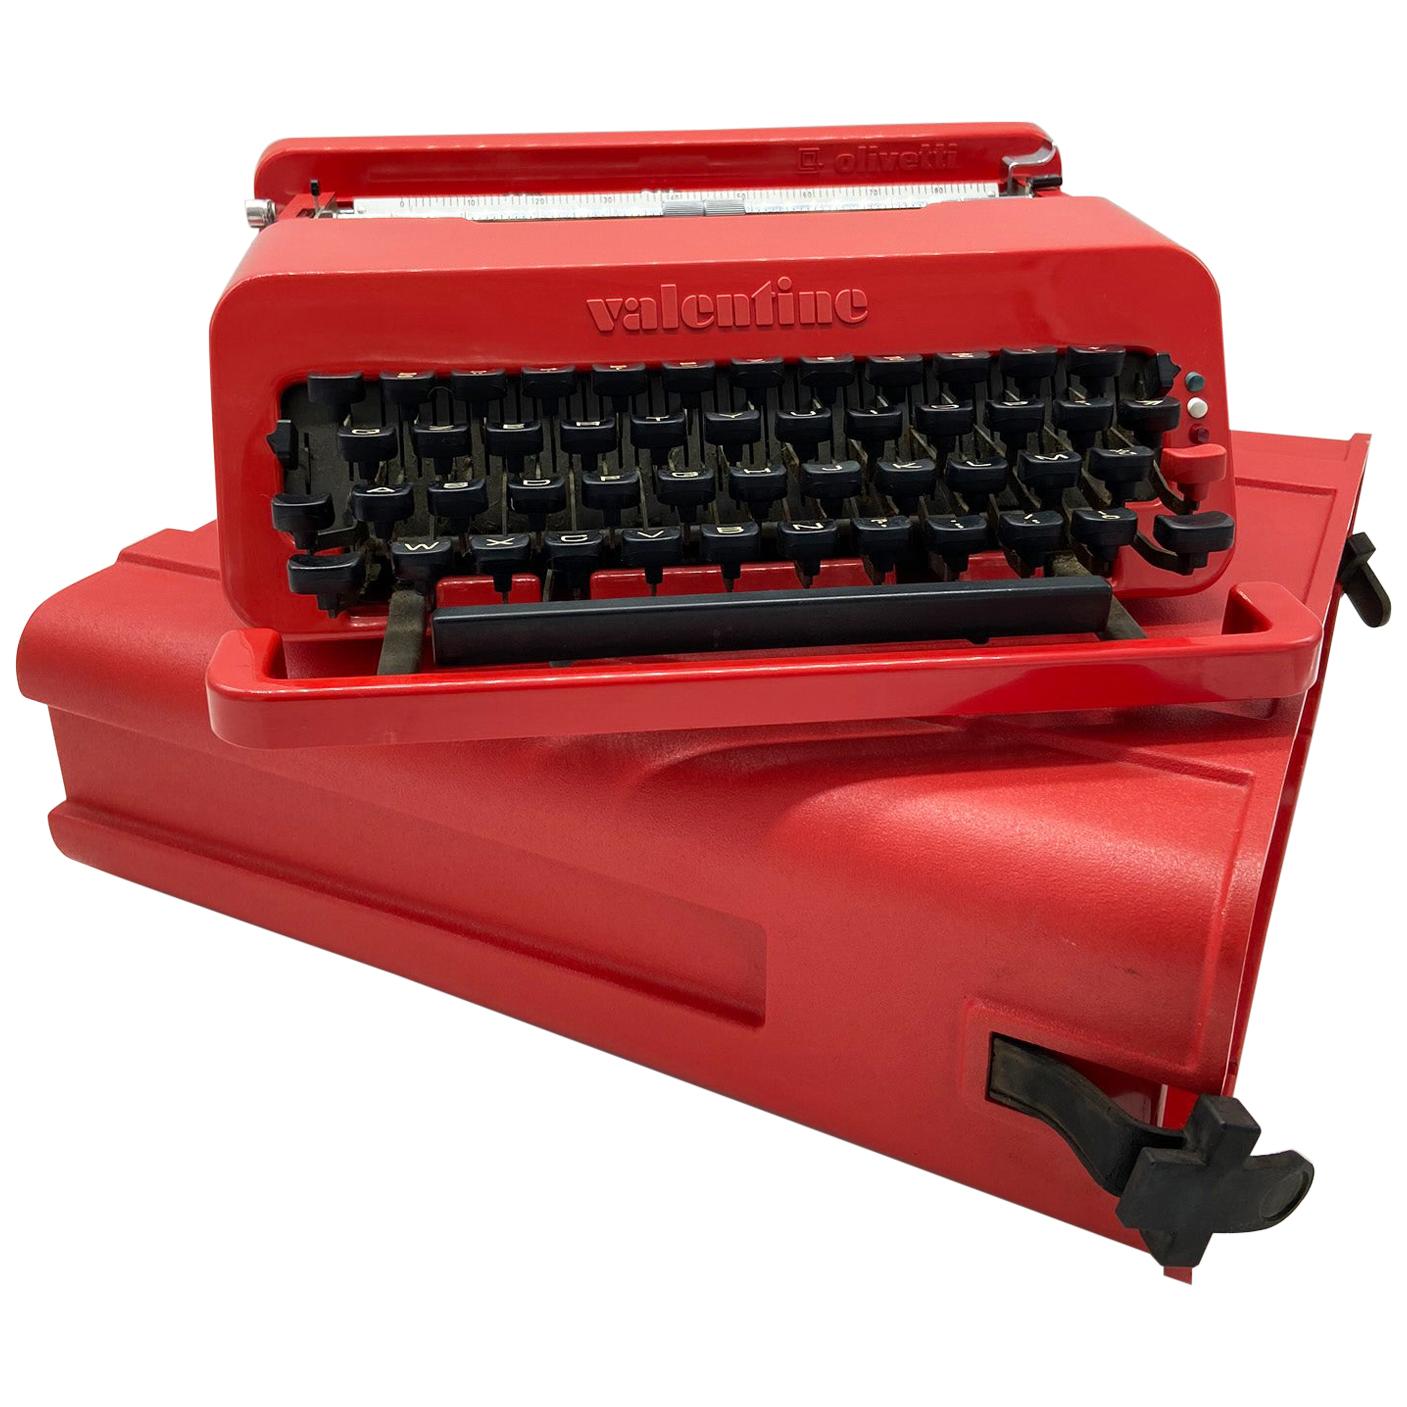 1968, Ettore Sottsas & Perry King for Olivetti, Italy, Red "Valentine" Typewrite